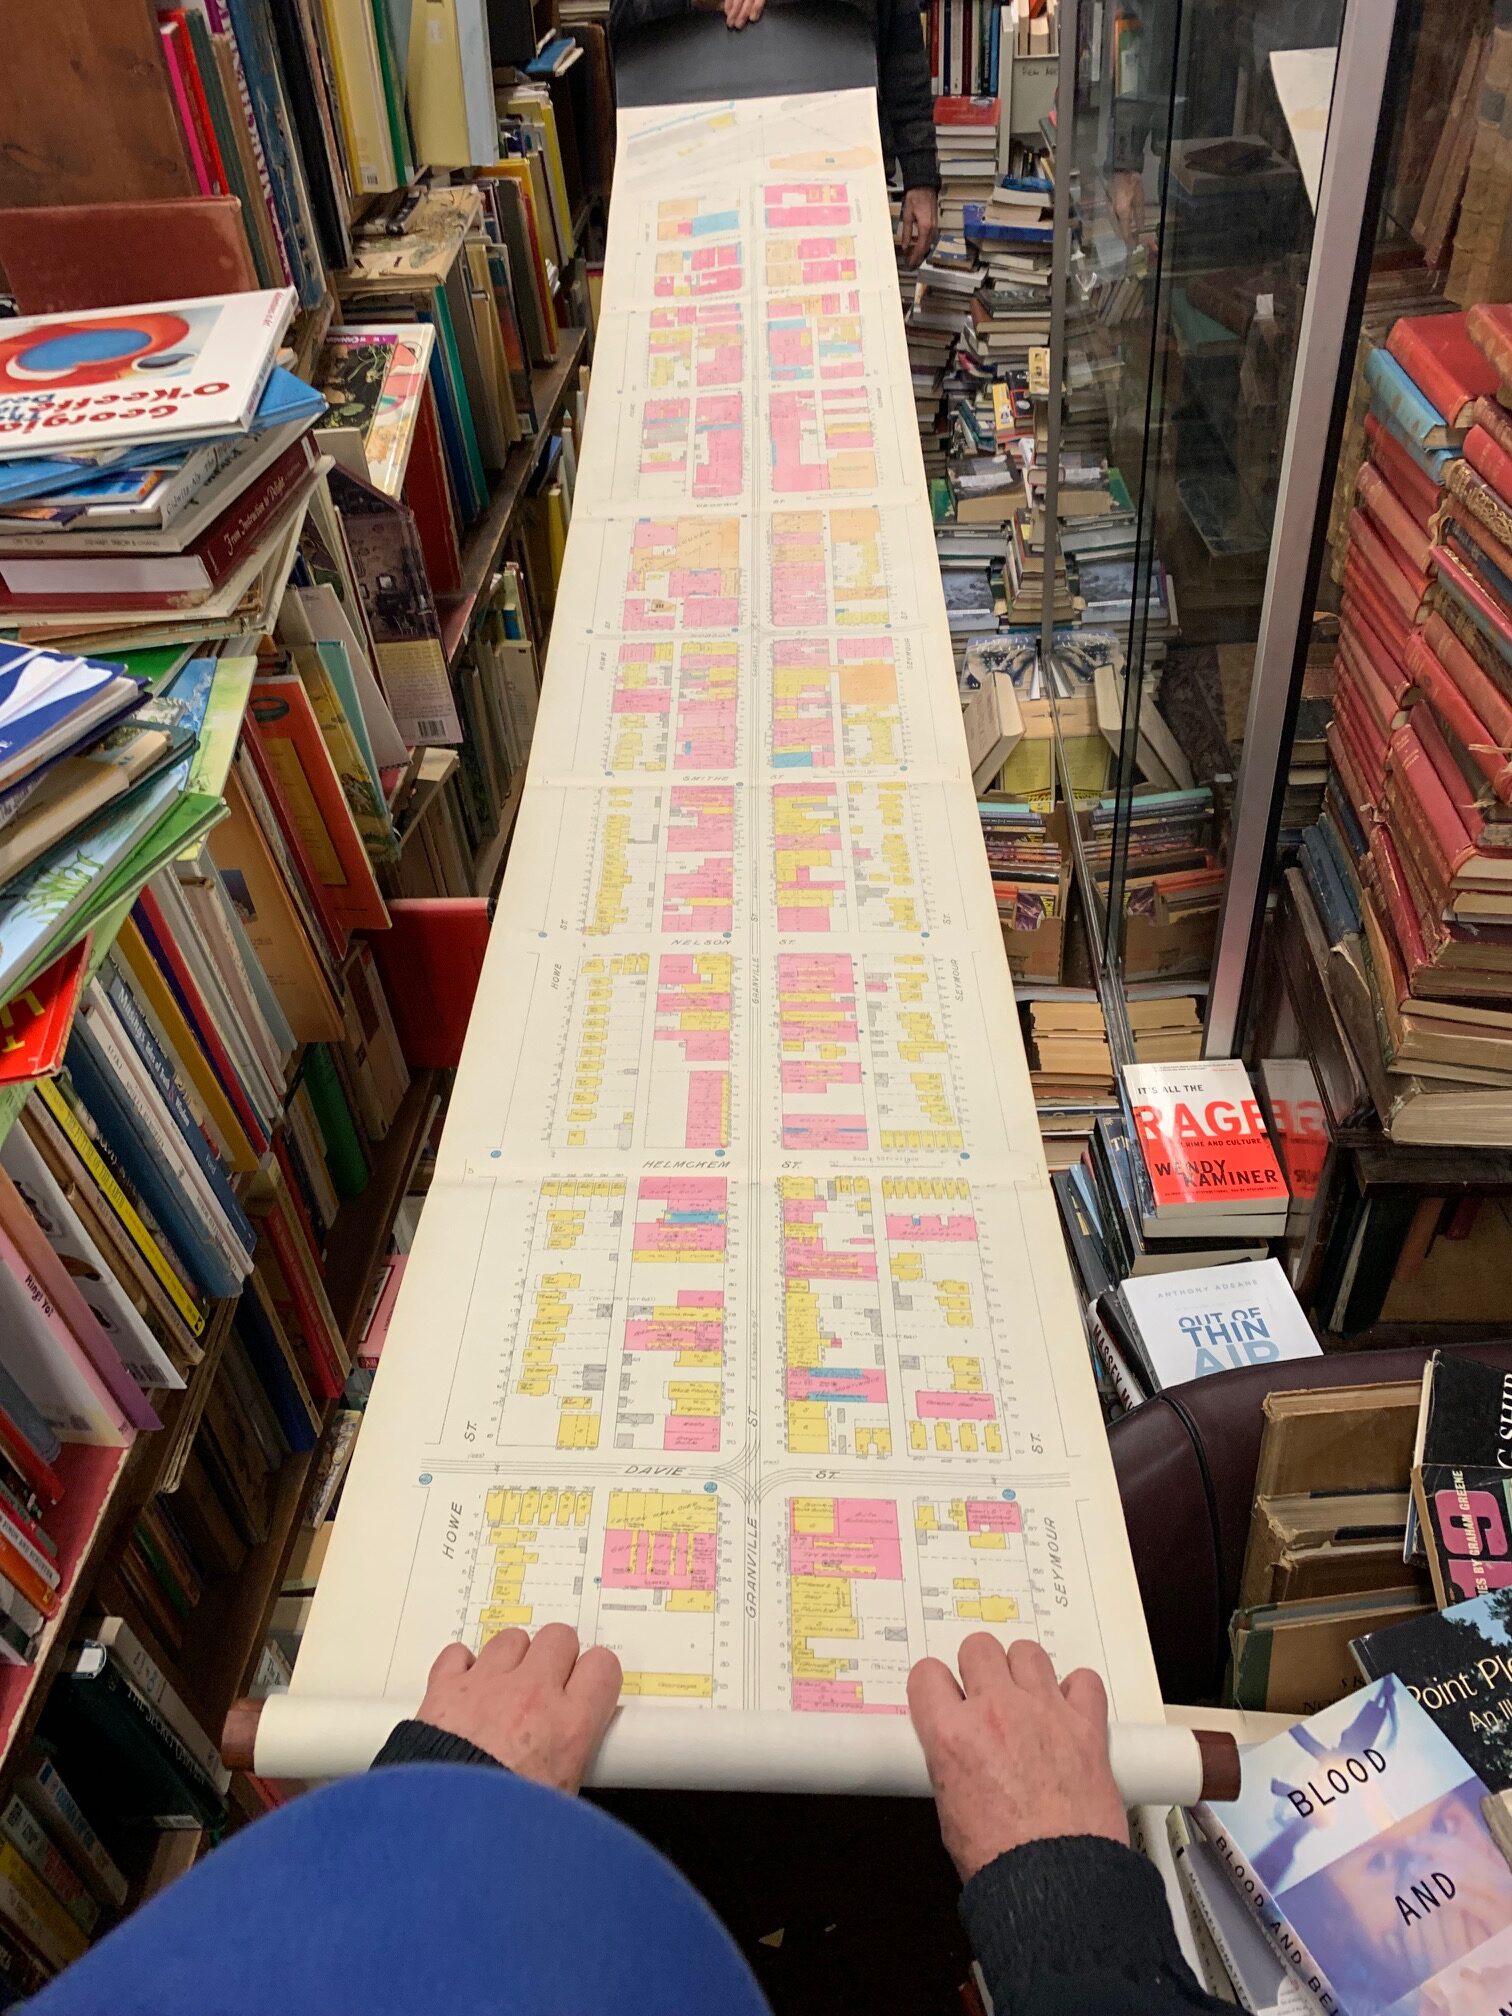 A scroll document rolled out shows a city map of blocks with buildings coloured in pink or yellow. Map is surrounded by stacked books everywhere.